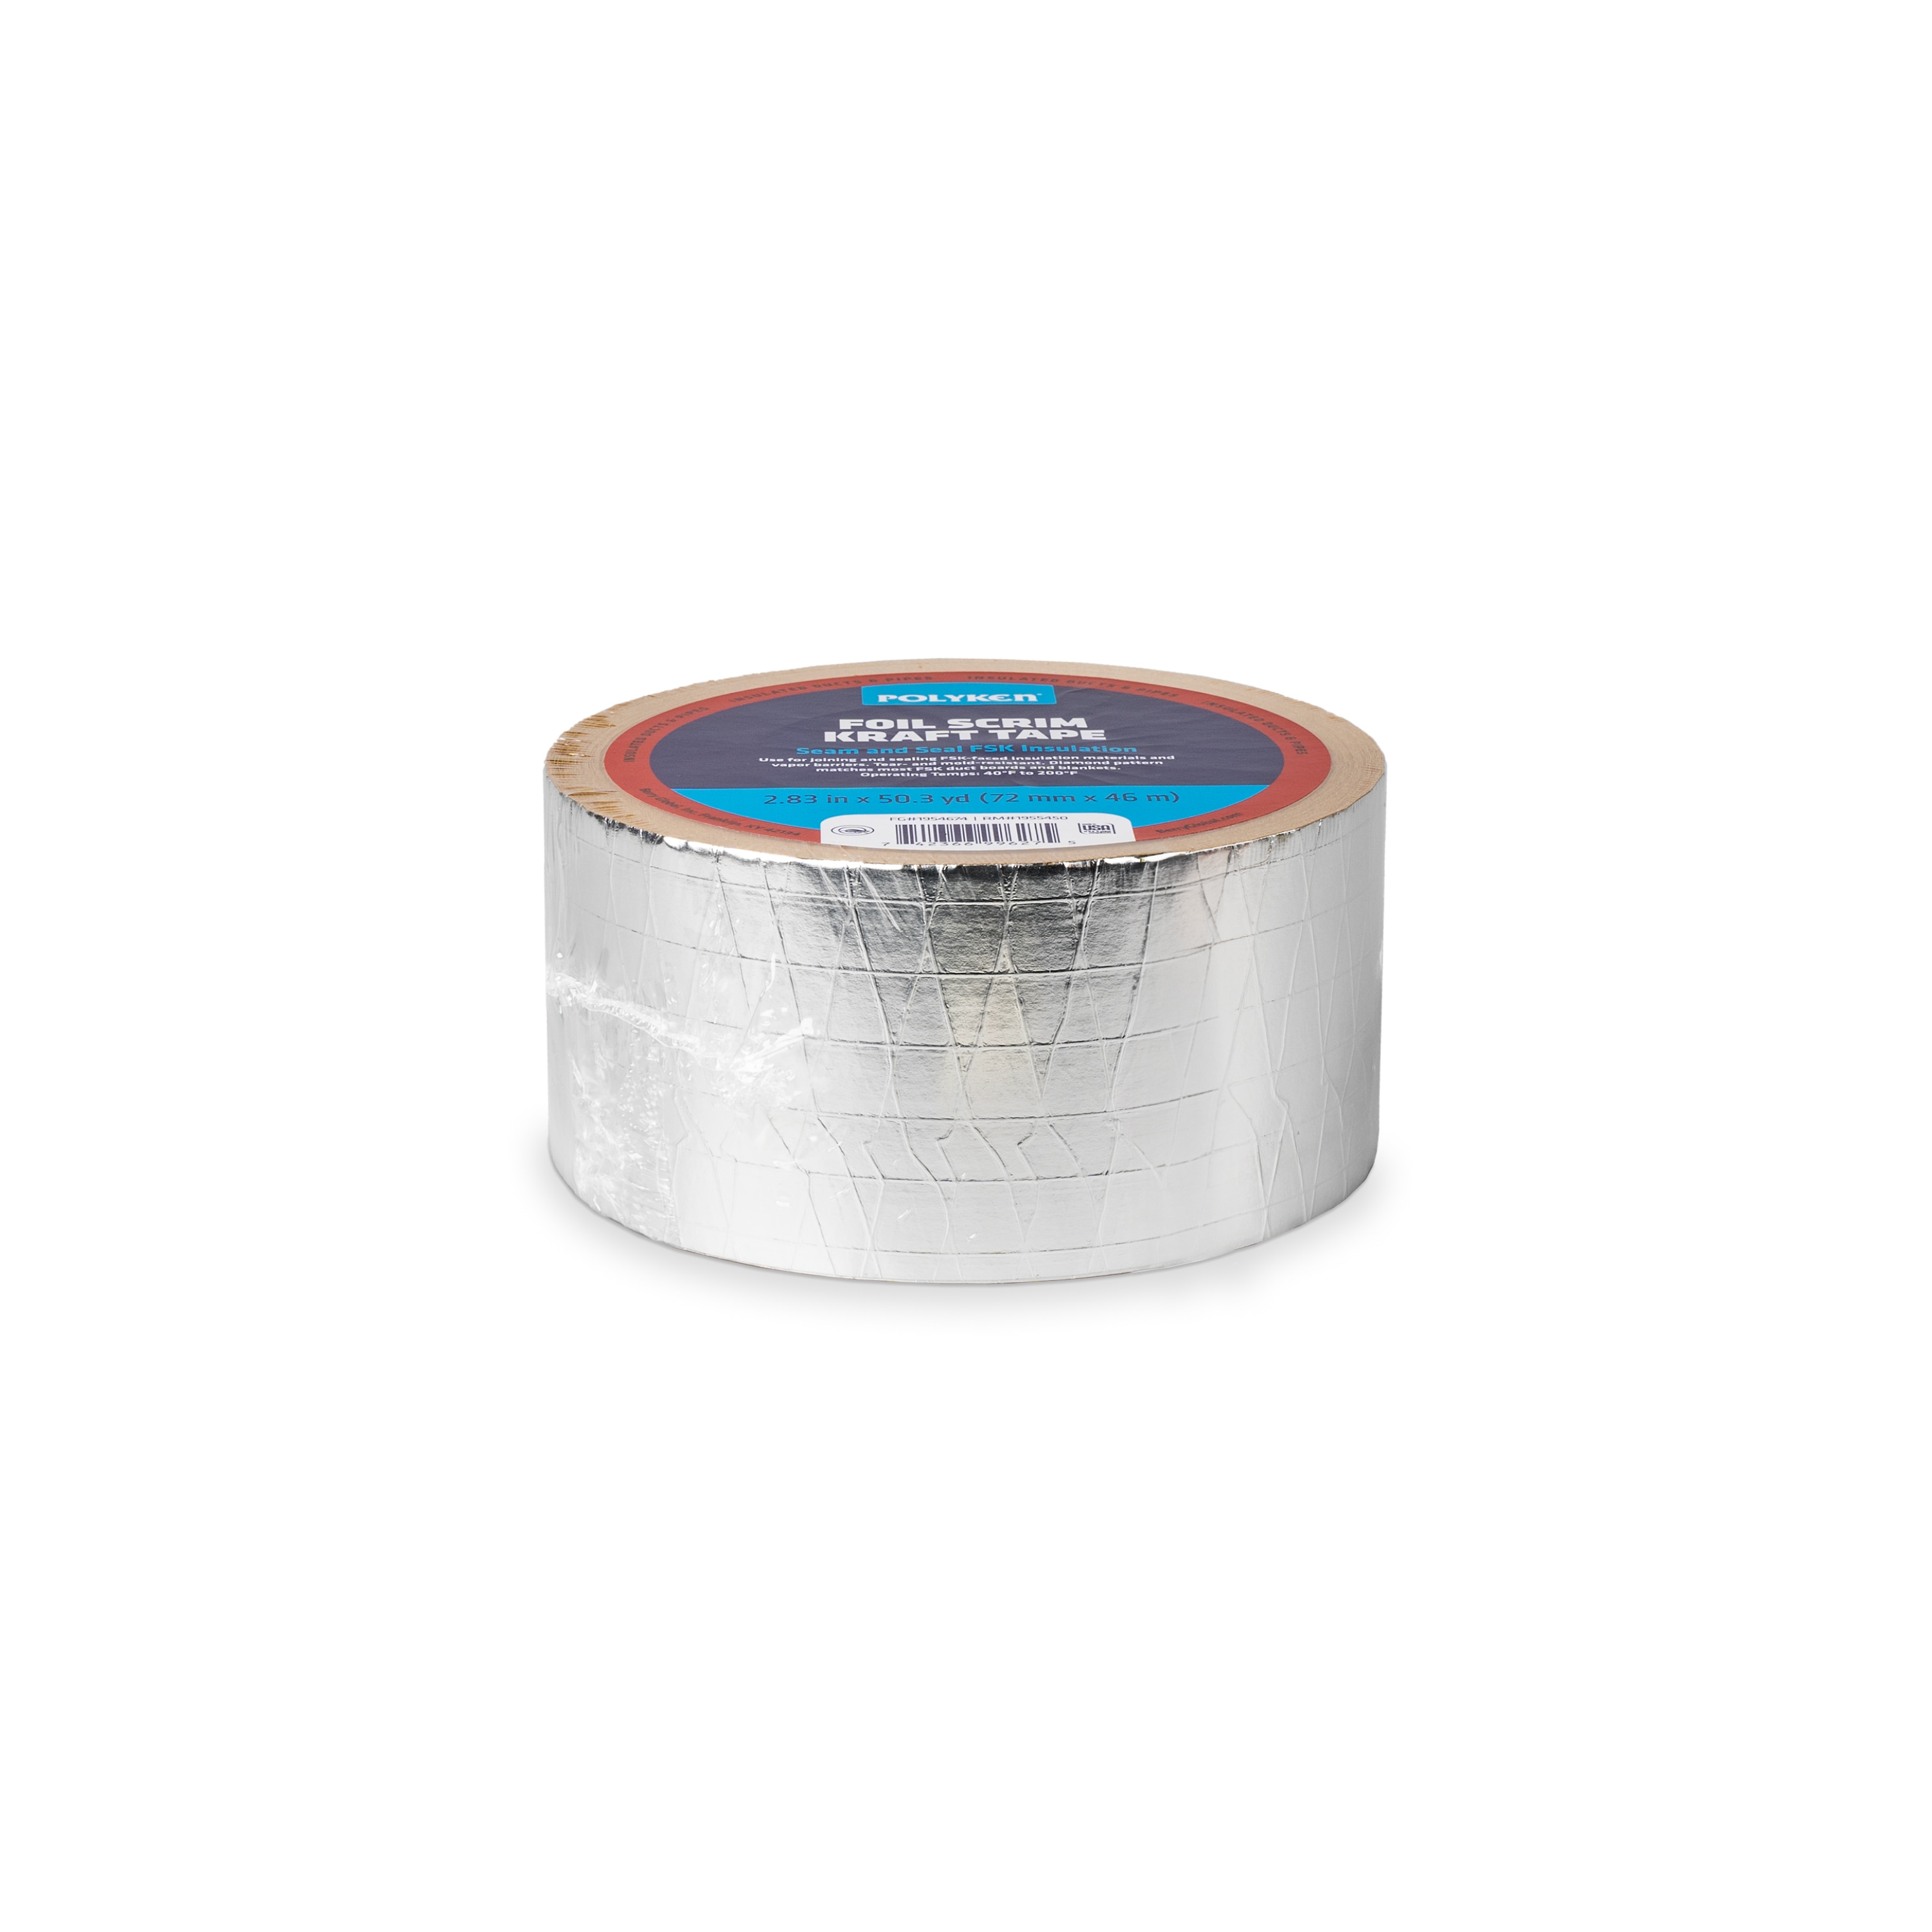 SIGA Twinet Double Stick Tape: 3/4 Wide